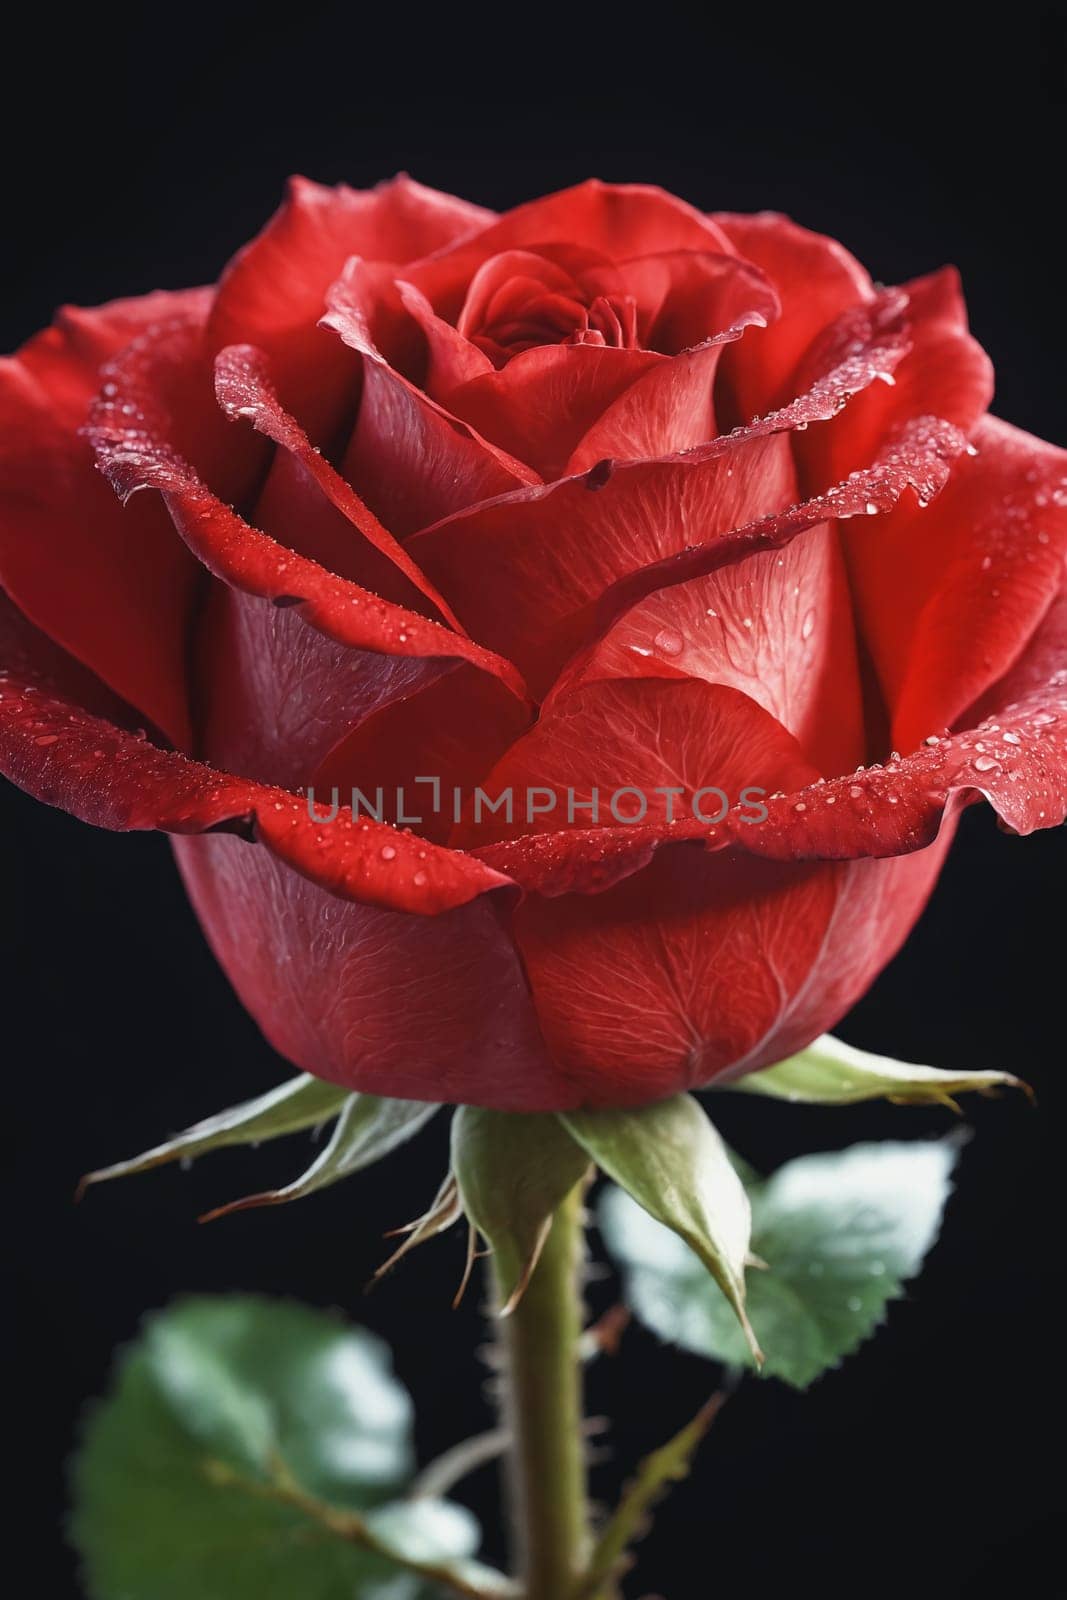 A Marriage of Petals and Raindrops: A Close-Up of a Drenched Red Rose by Andre1ns